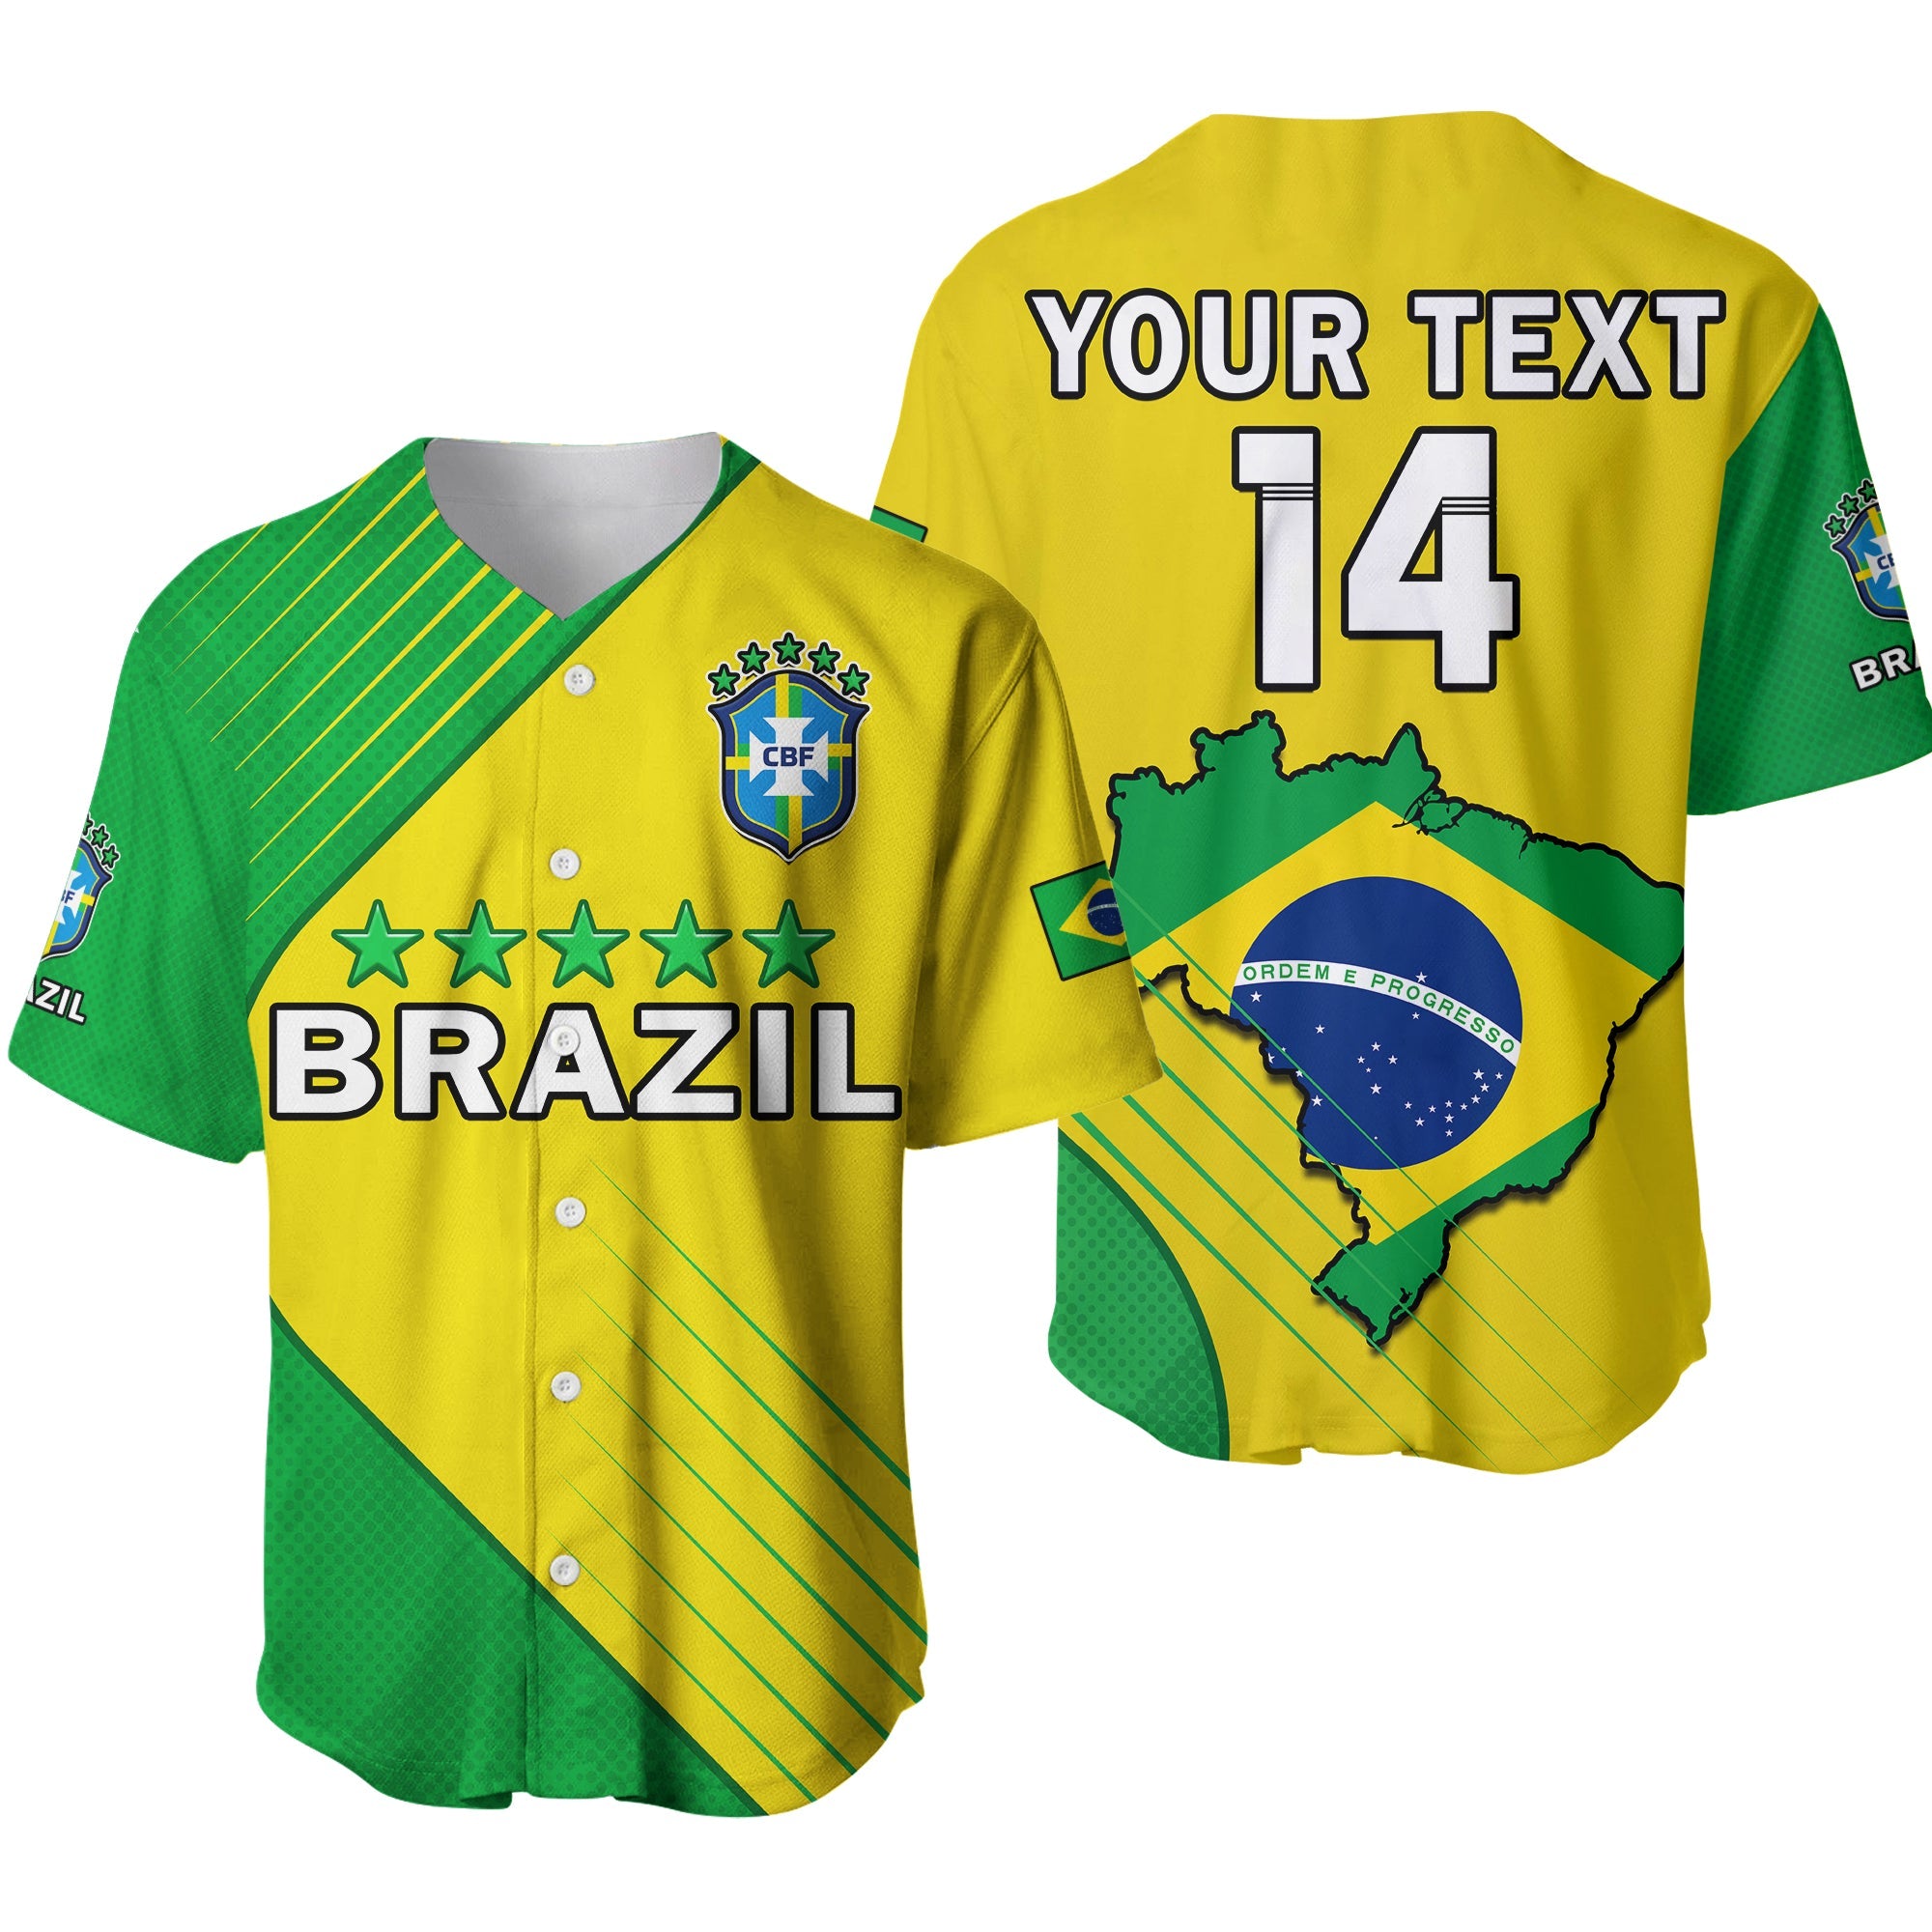 custom-text-and-number-brazil-football-baseball-jersey-brasil-map-come-on-canarinho-sporty-style